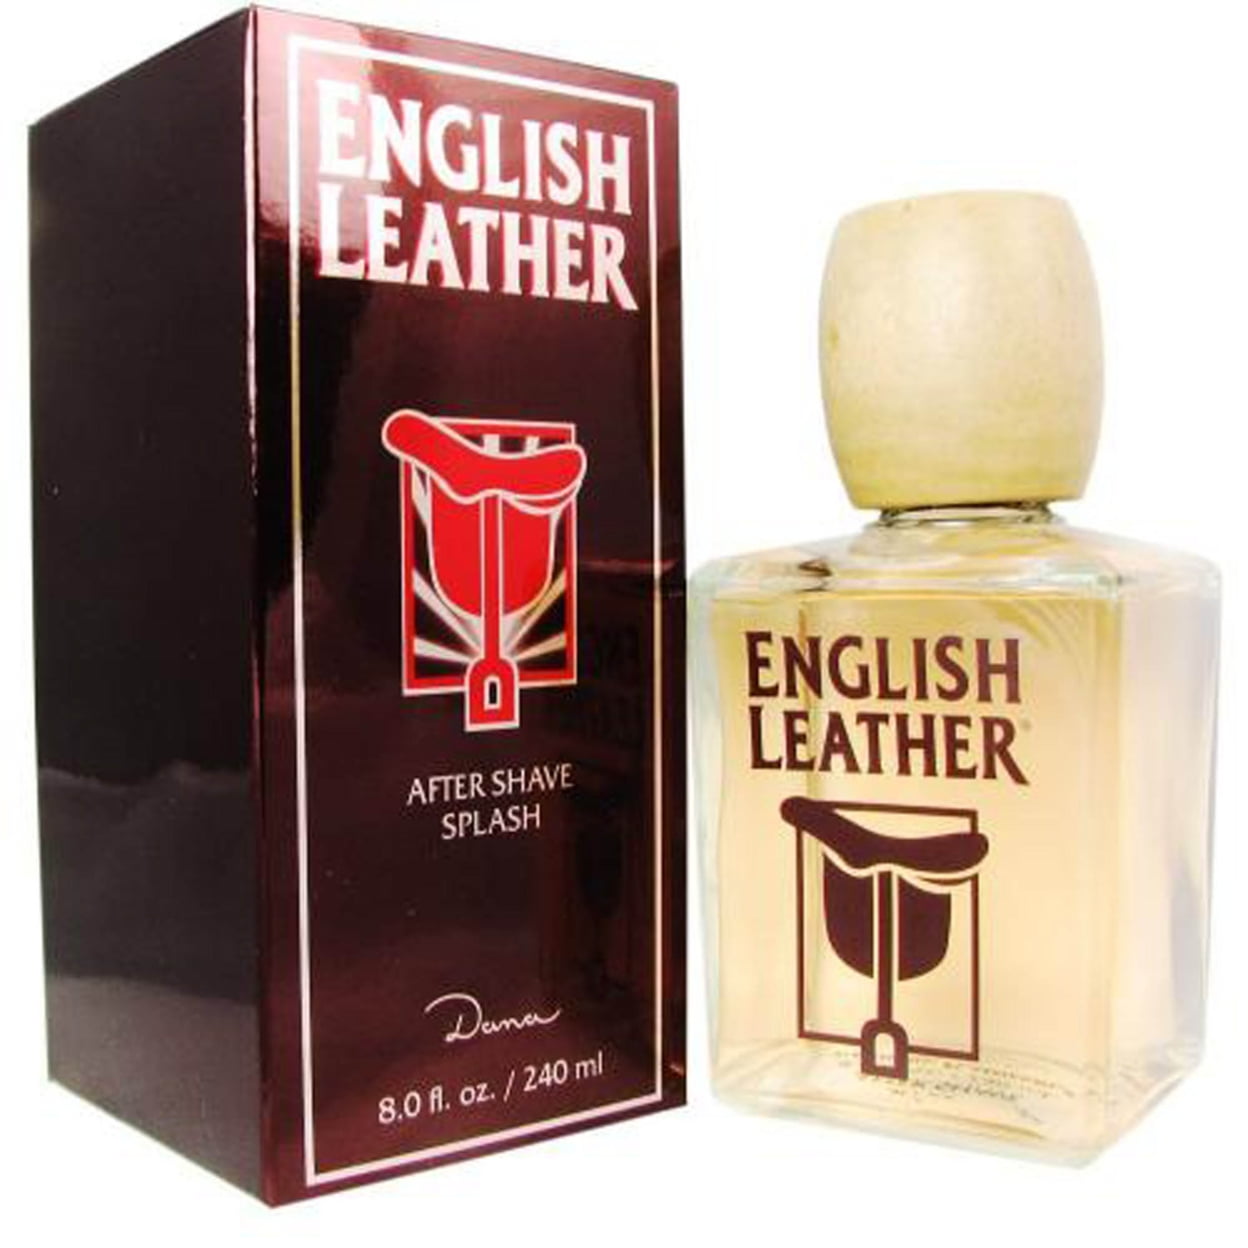 English Leather By Dana Cologne Aftershave 8 Oz